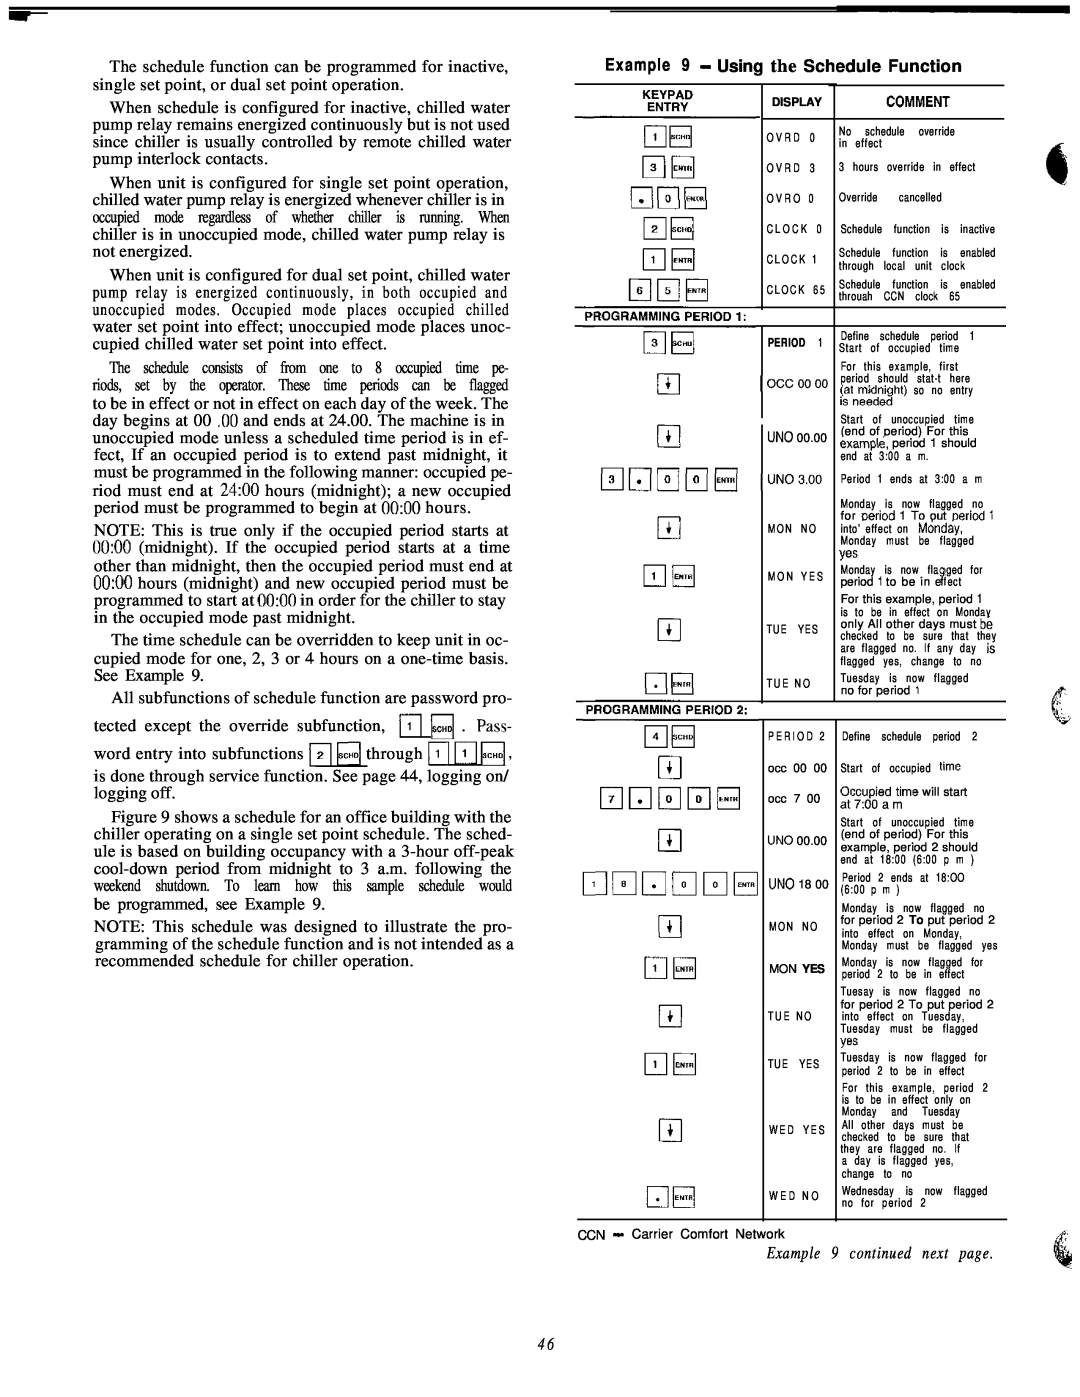 Carrier 040-420 specifications Example 9 - Using the Schedule Function, Example 9 continued next page 